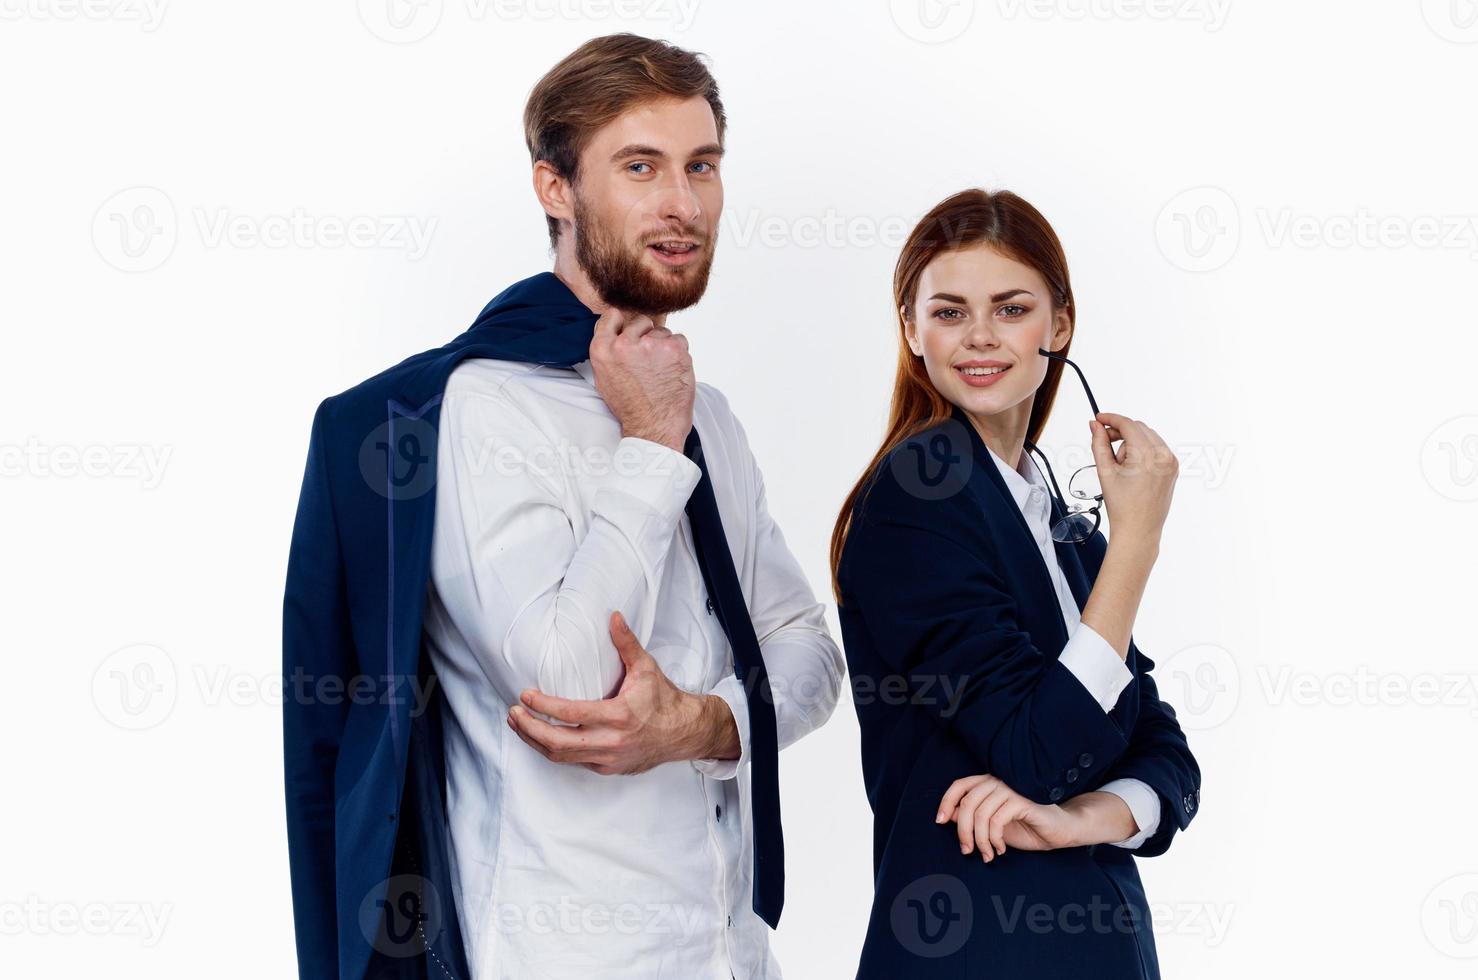 business man and woman in office manager suit professionals photo